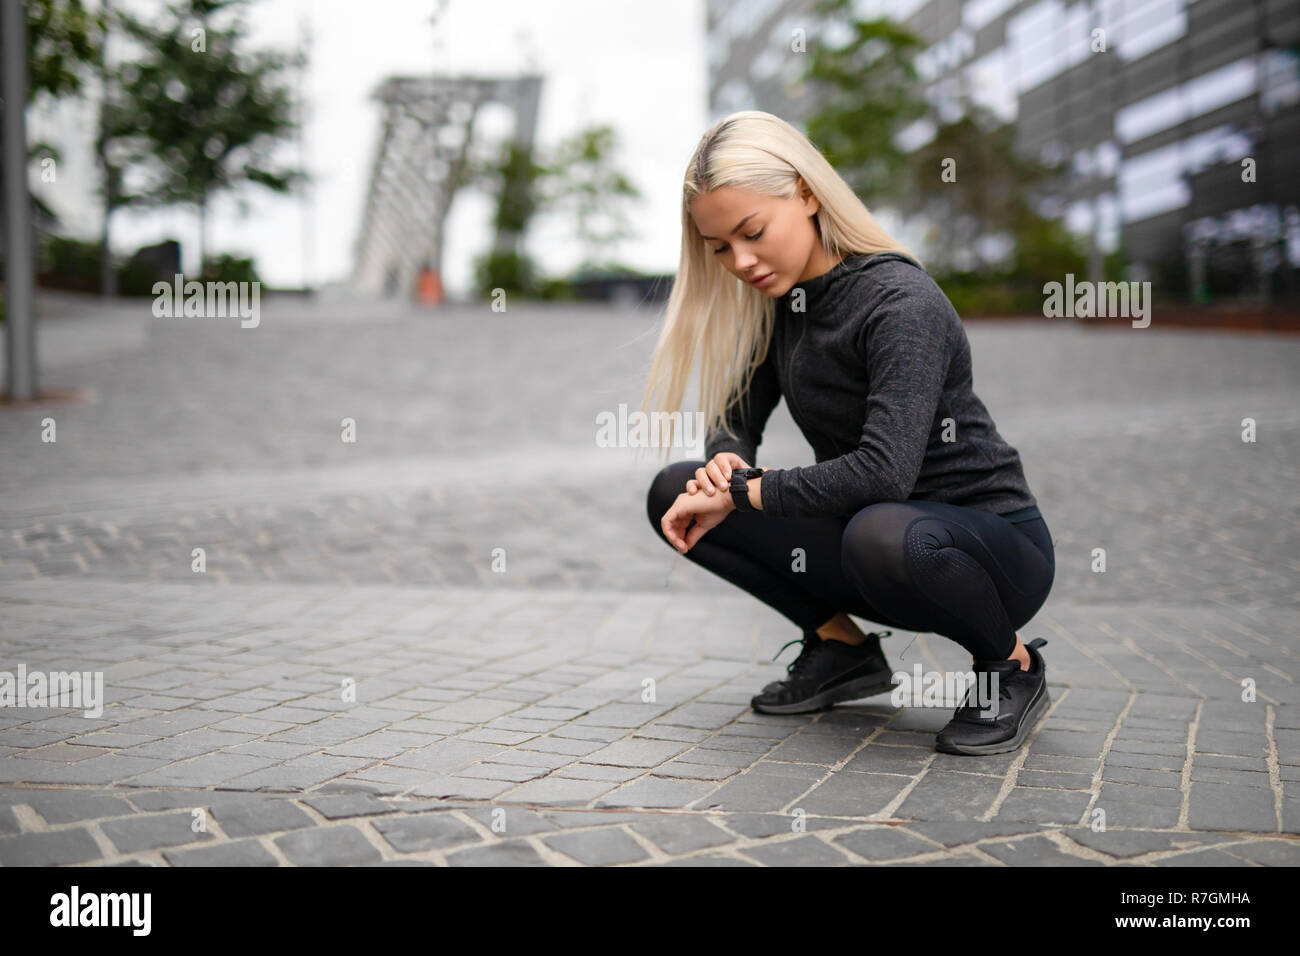 Sporty Female Runner Using Smartwatch to See Running Performance Stock Photo